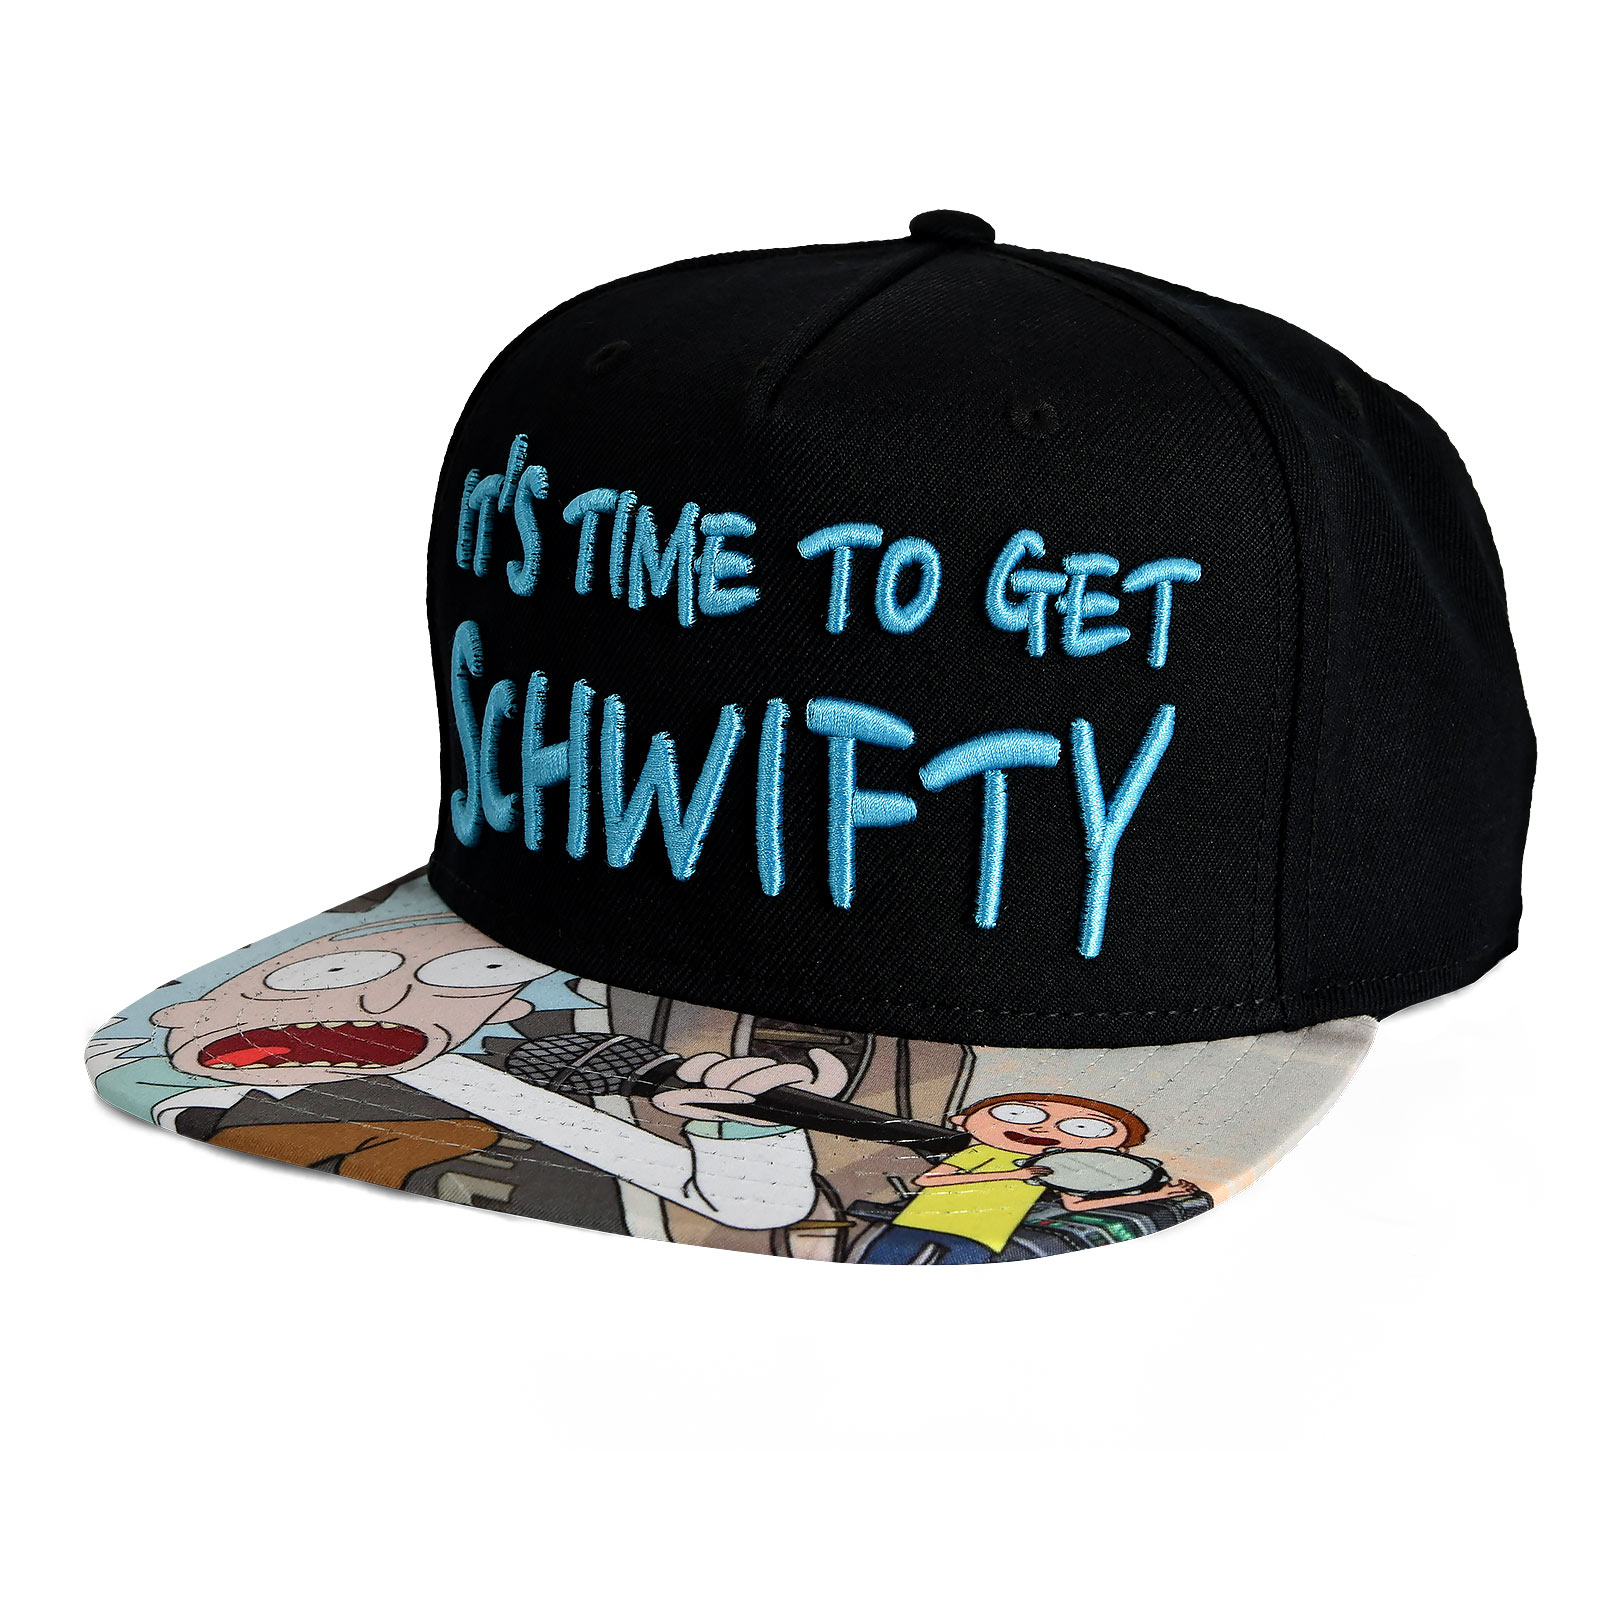 Rick et Morty - Casquette Snapback Get Schwifty